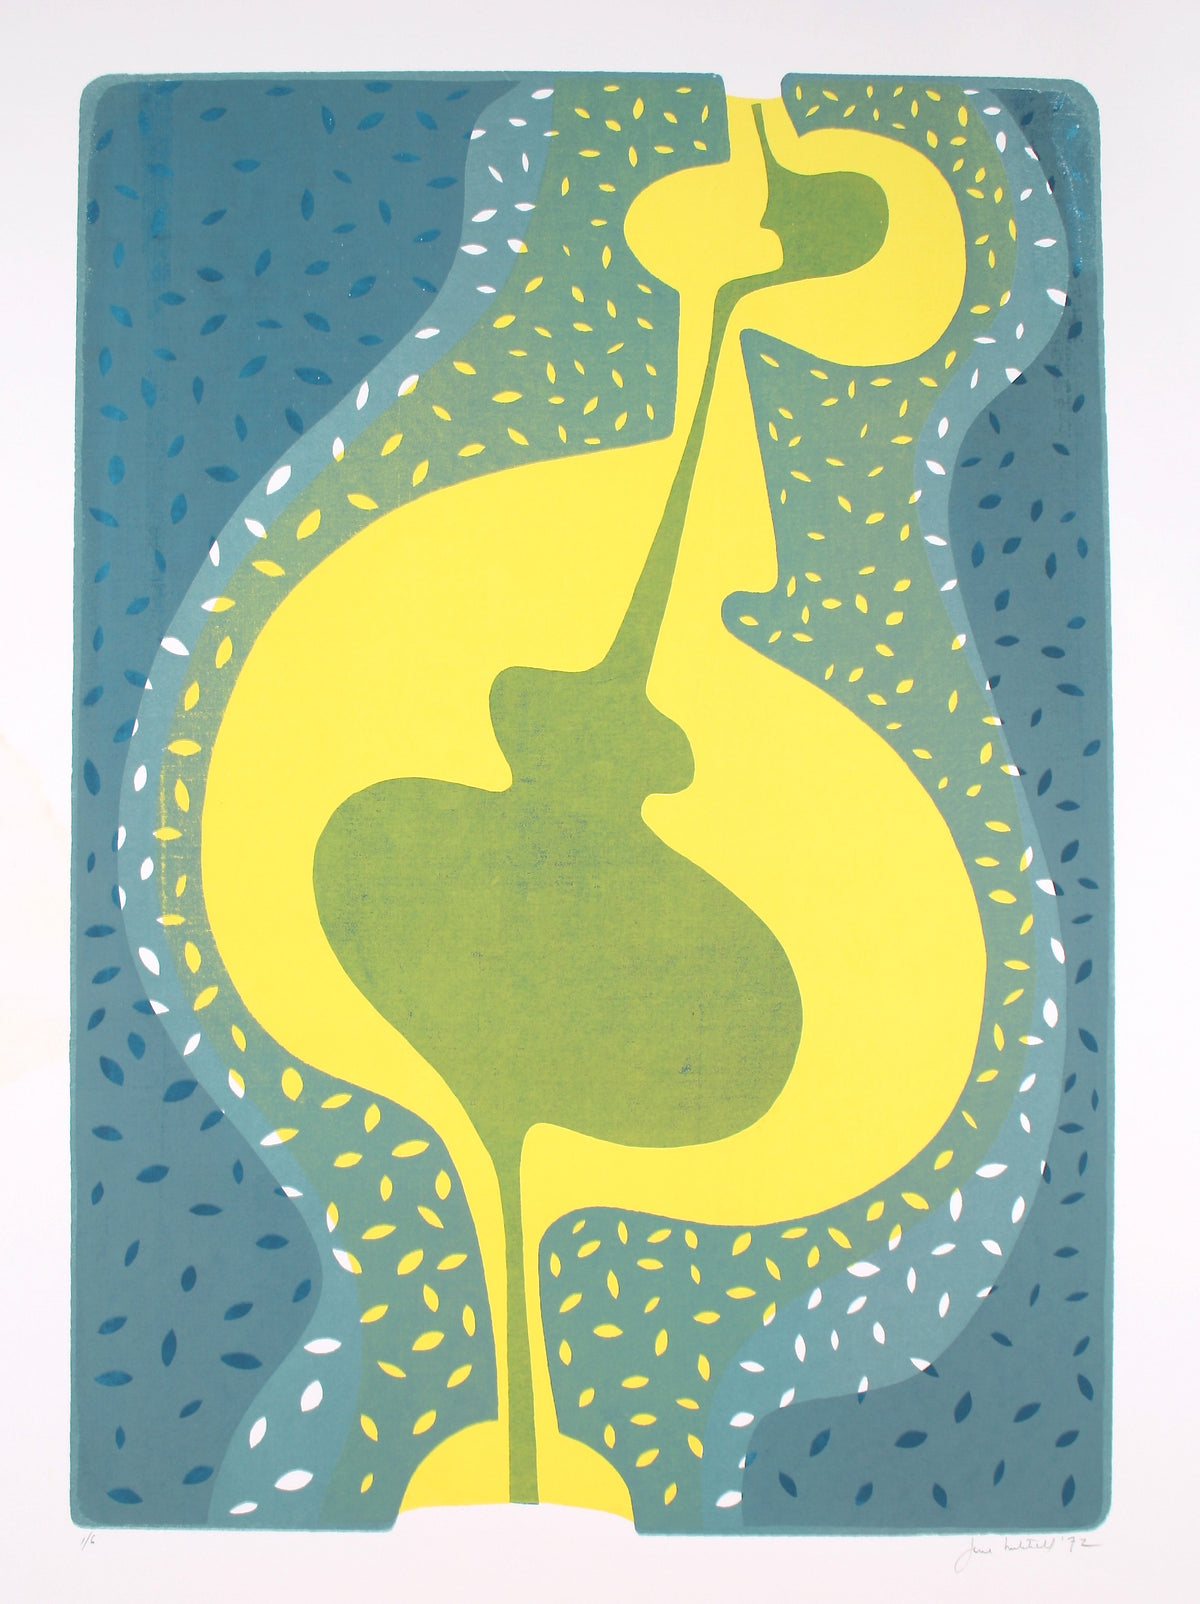 Green &amp; Yellow Abstracted Forms &lt;br&gt;1972 Serigraph &lt;br&gt;&lt;br&gt;#71900